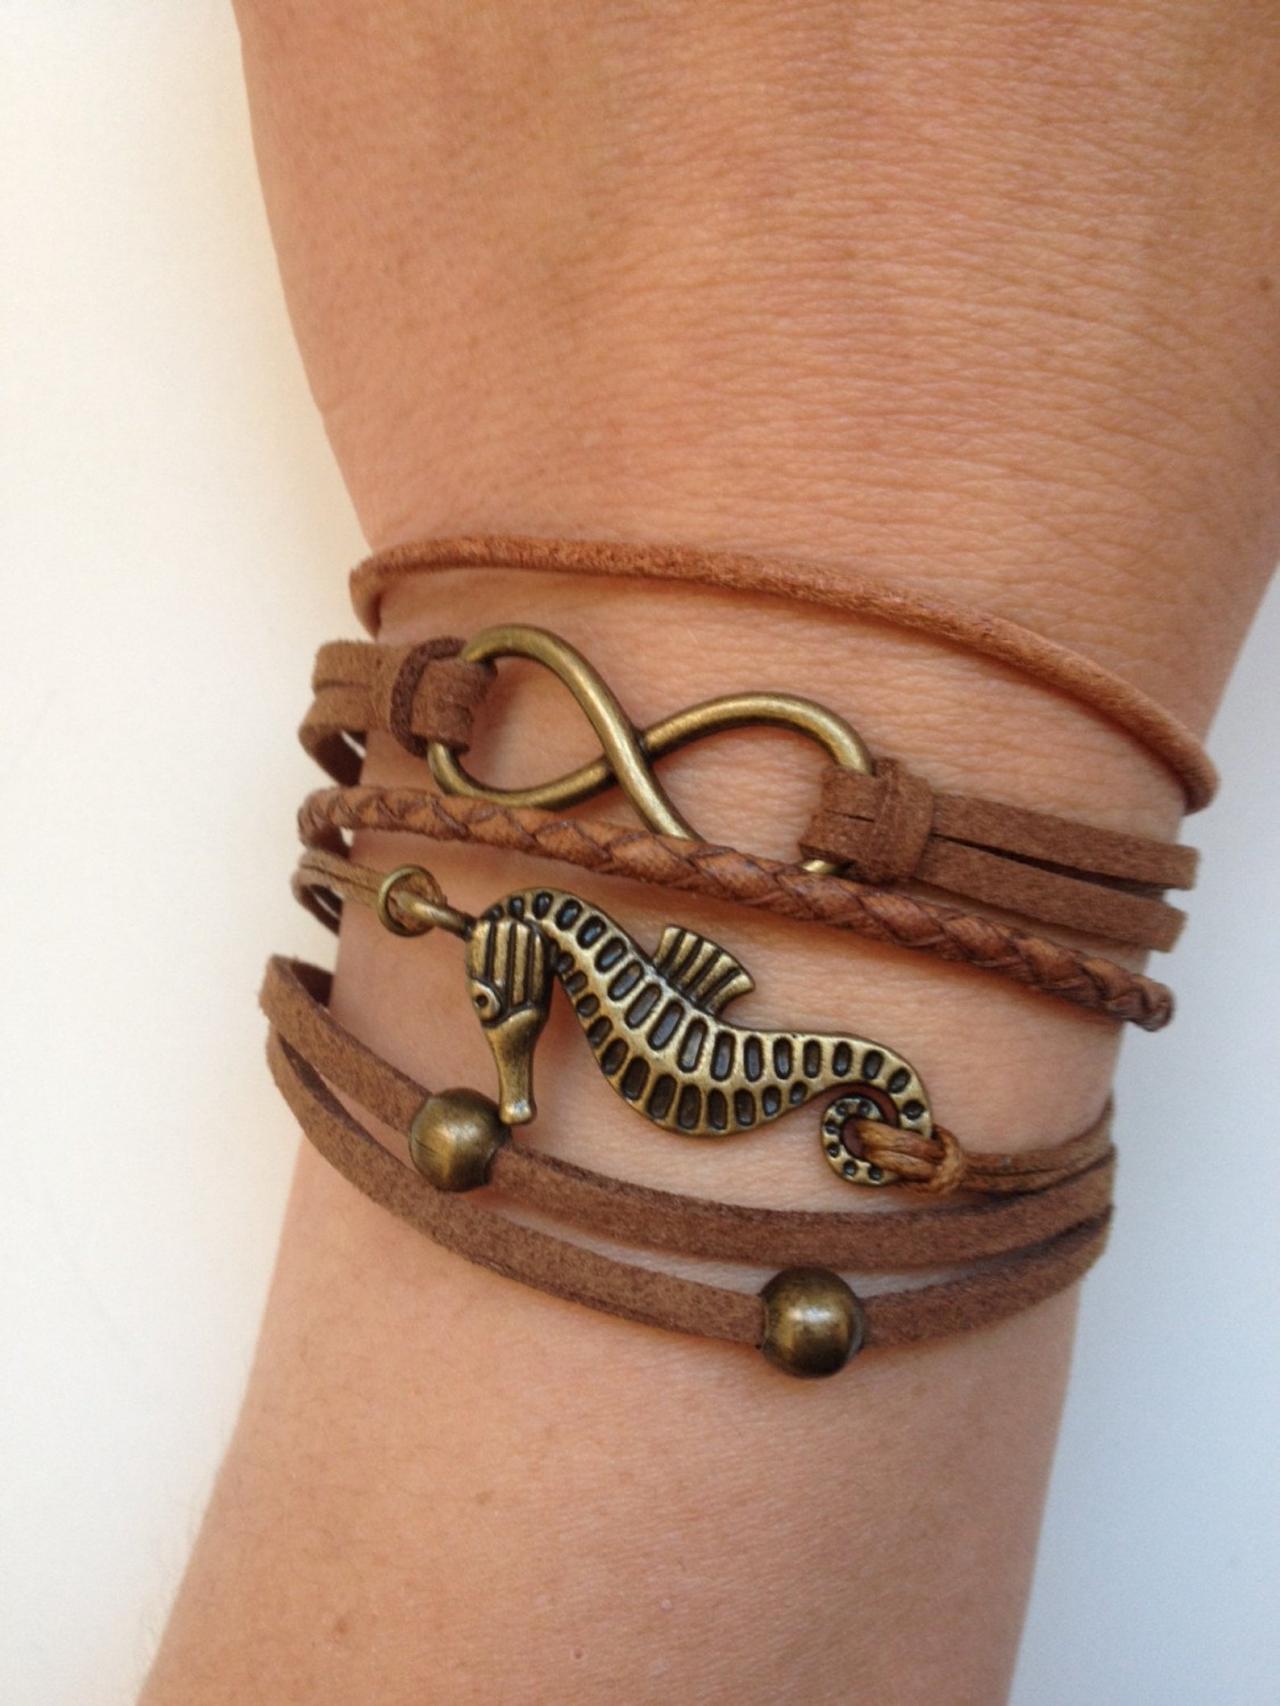 Infinity Bracelet 119 - Sea Horse Infinity Charm Brown Balls Friendship Bracelet Faith Cuff Real Leather Gift Adjustable